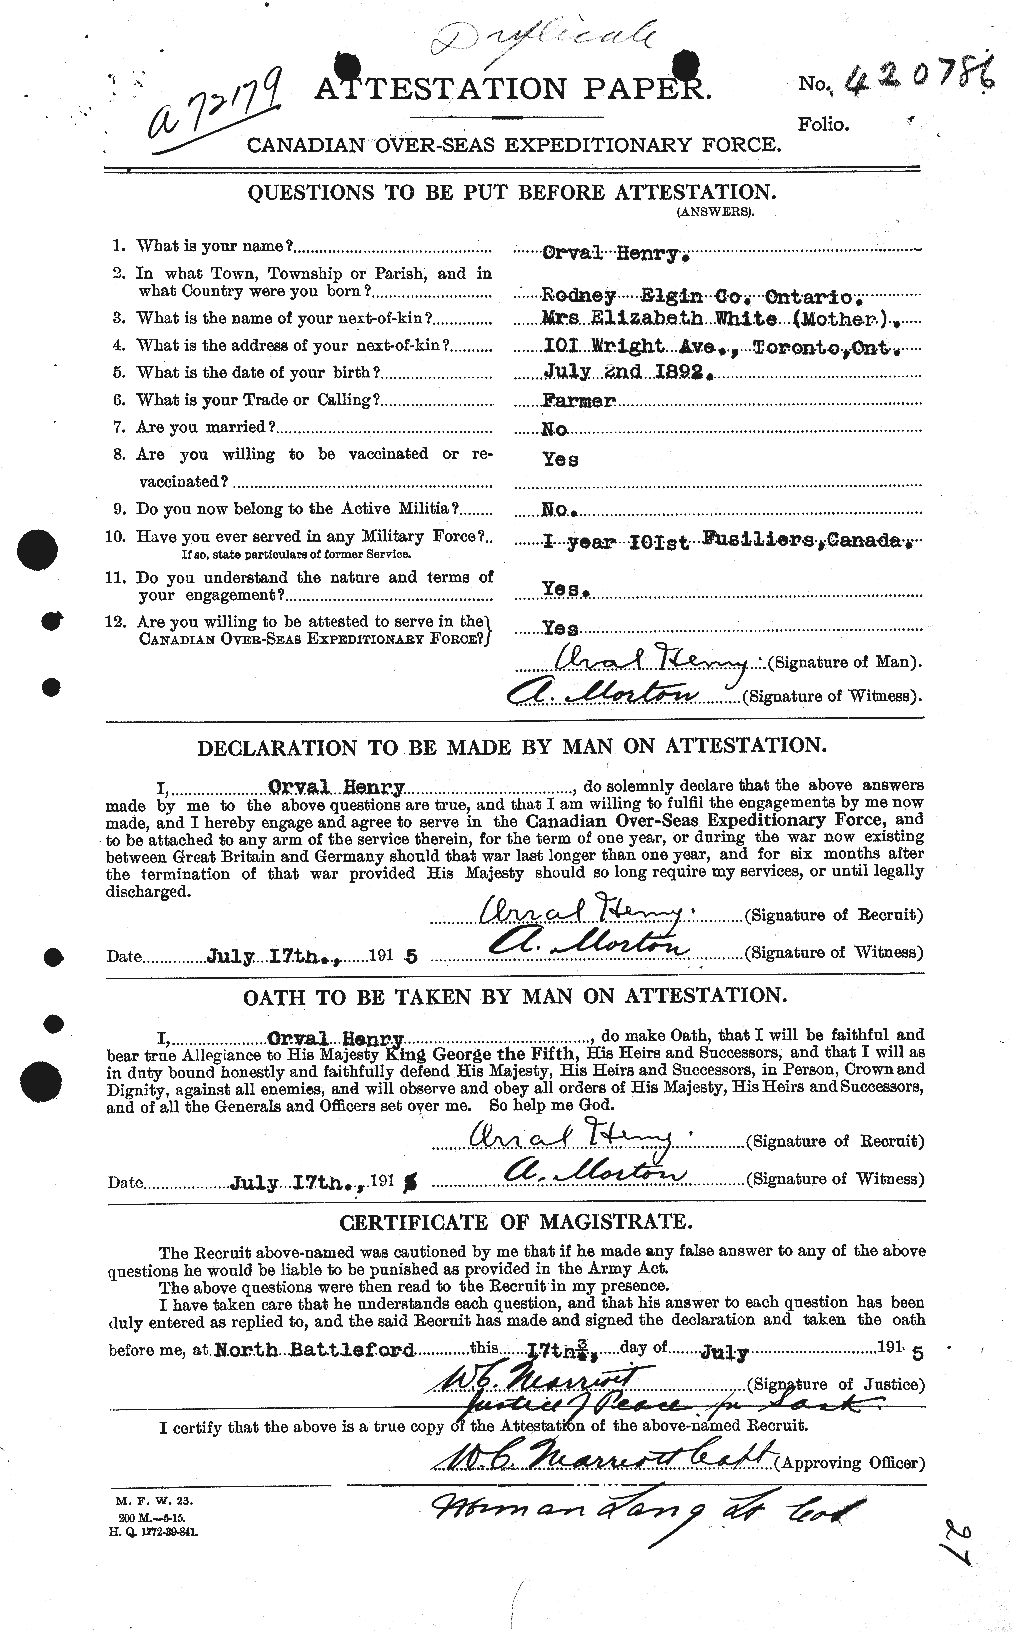 Personnel Records of the First World War - CEF 387676a